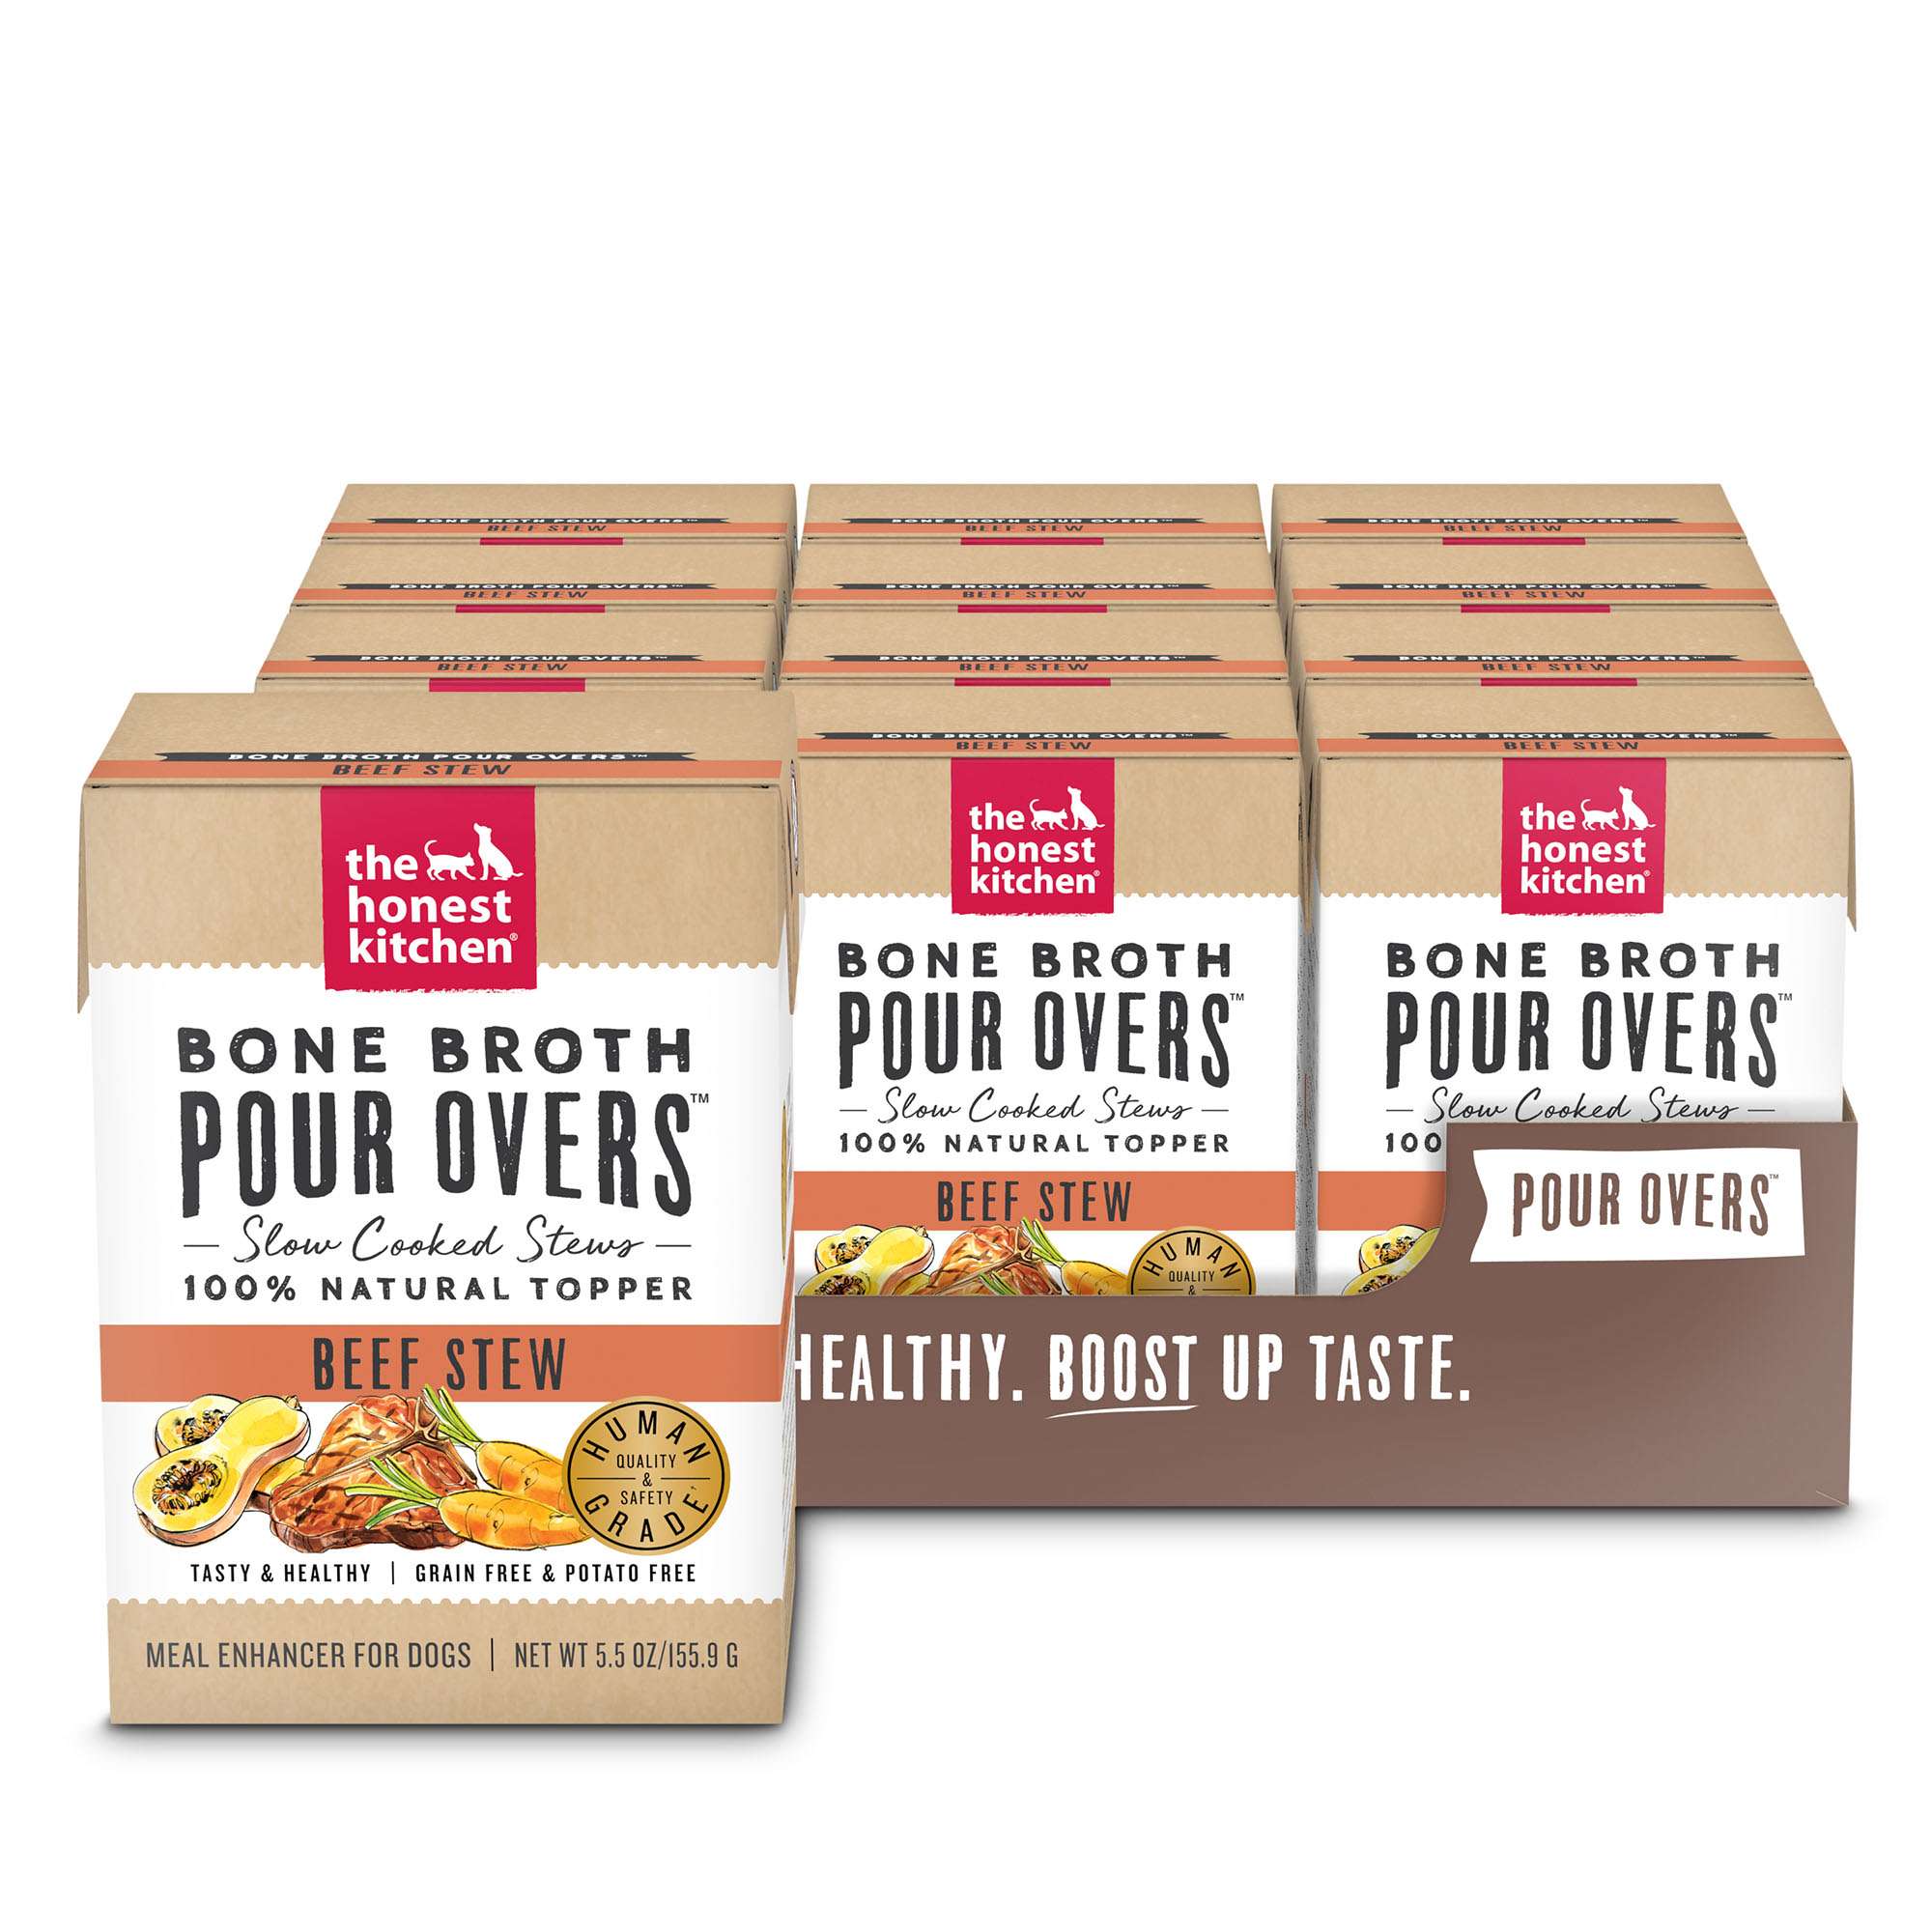 The Honest Kitchen Bone Broth Pour Overs: Beef Stew Wet Dog Food Topper, 5.5 oz., Case of 12, 12 X 5.5 OZ